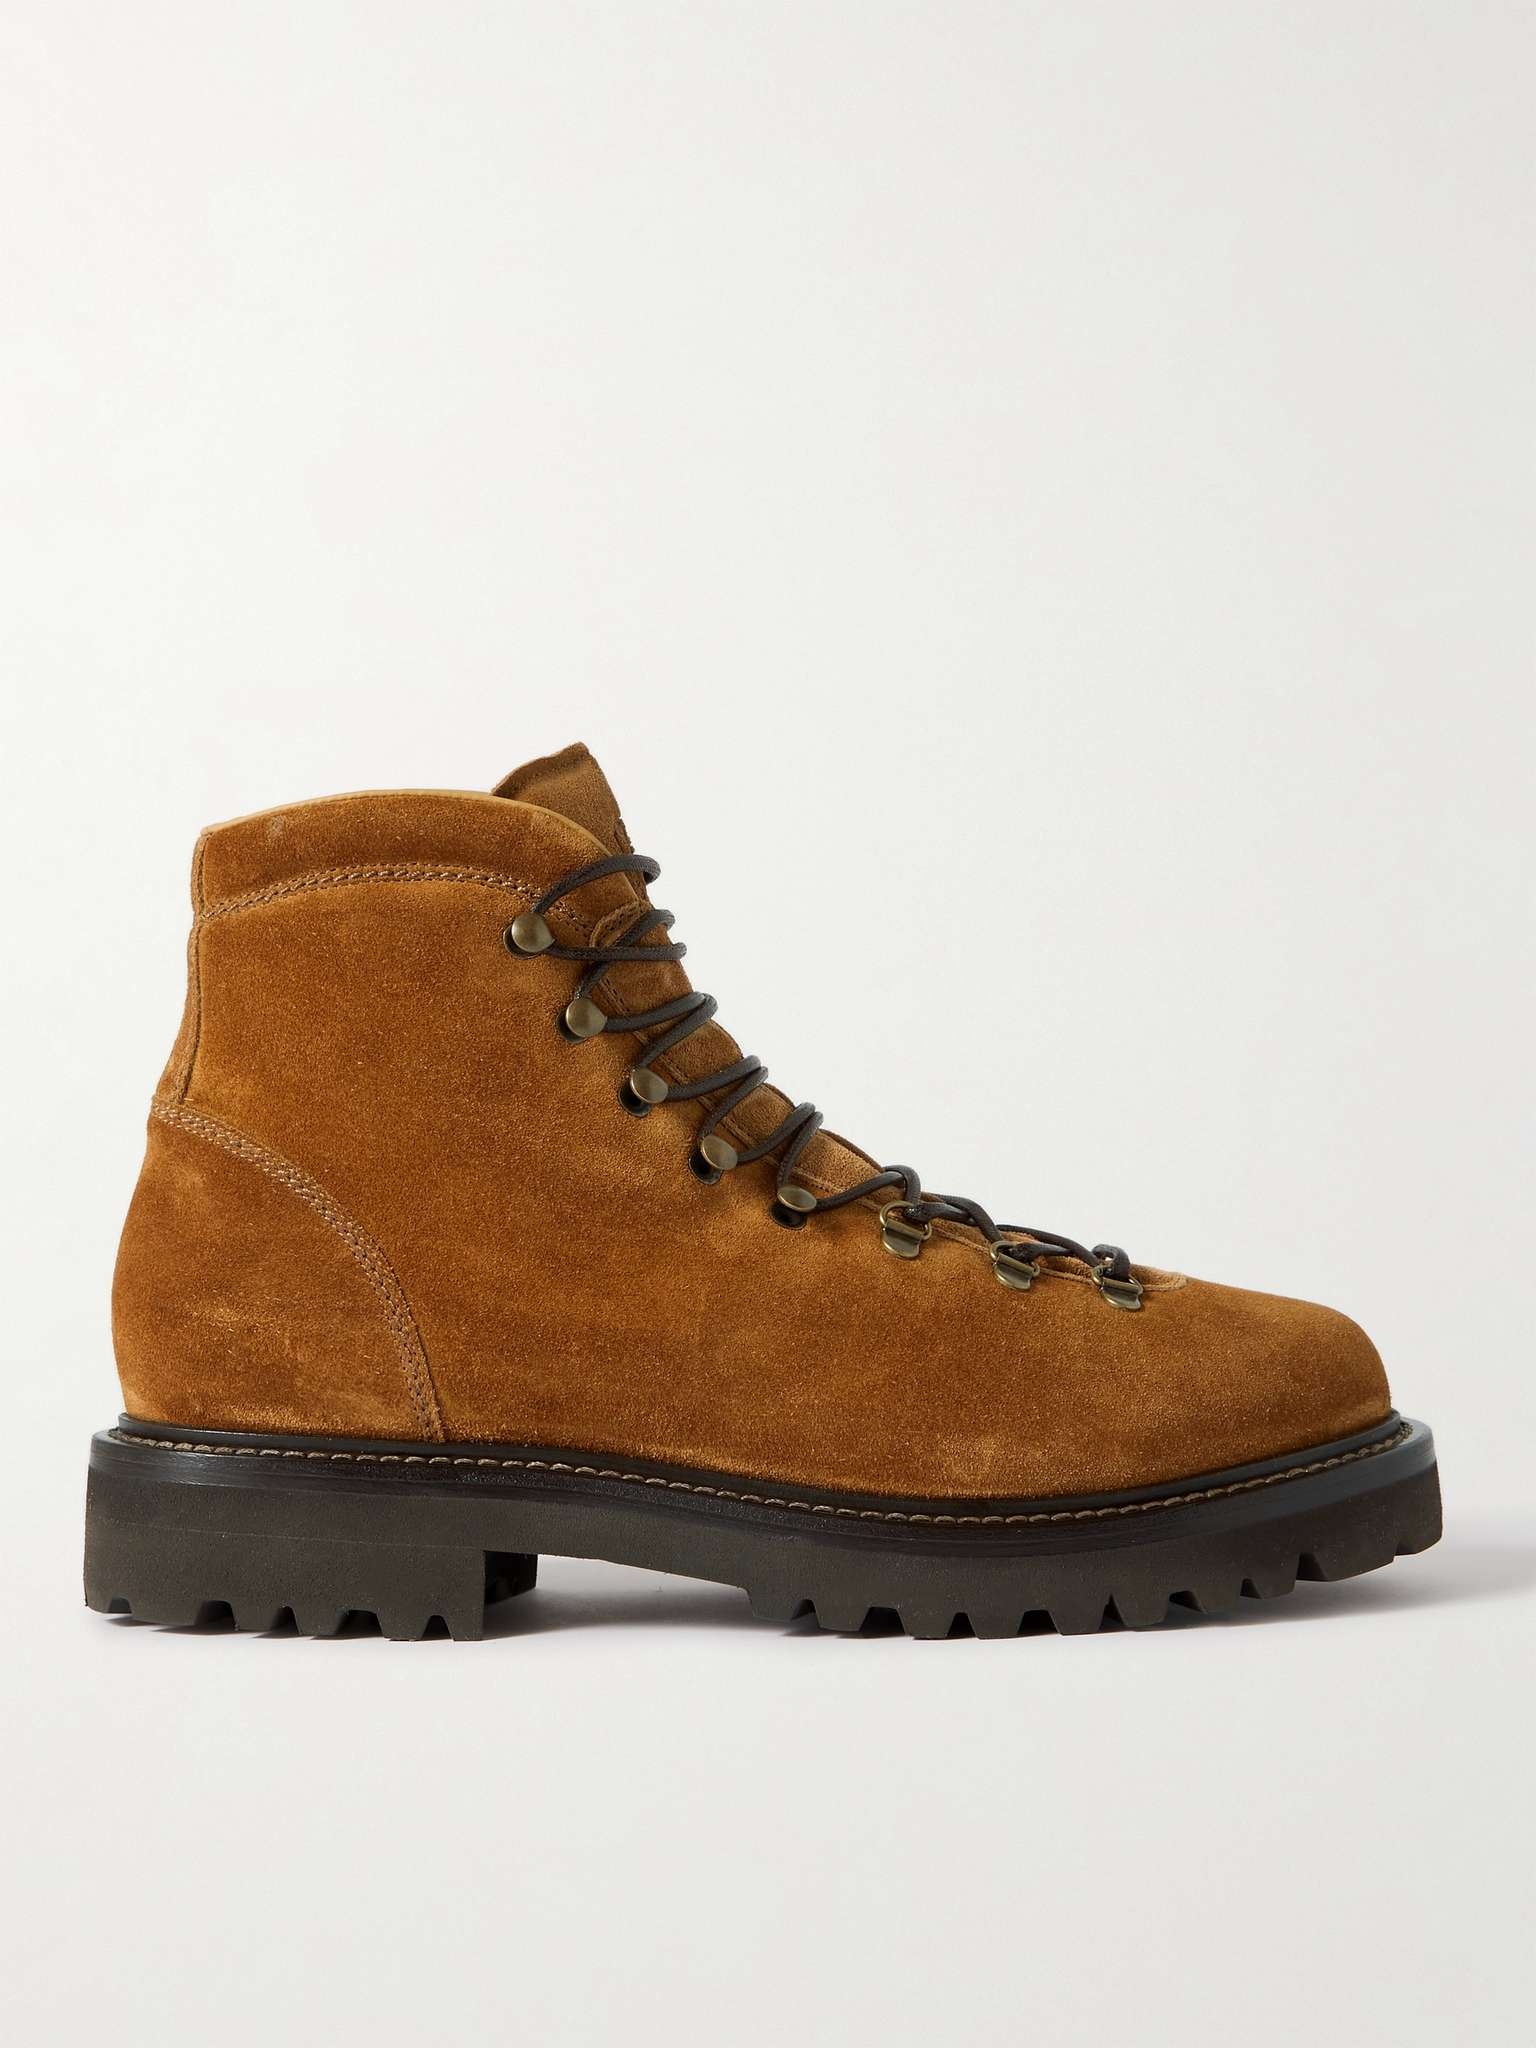 Shearling-Lined Suede Hiking Boots - 1